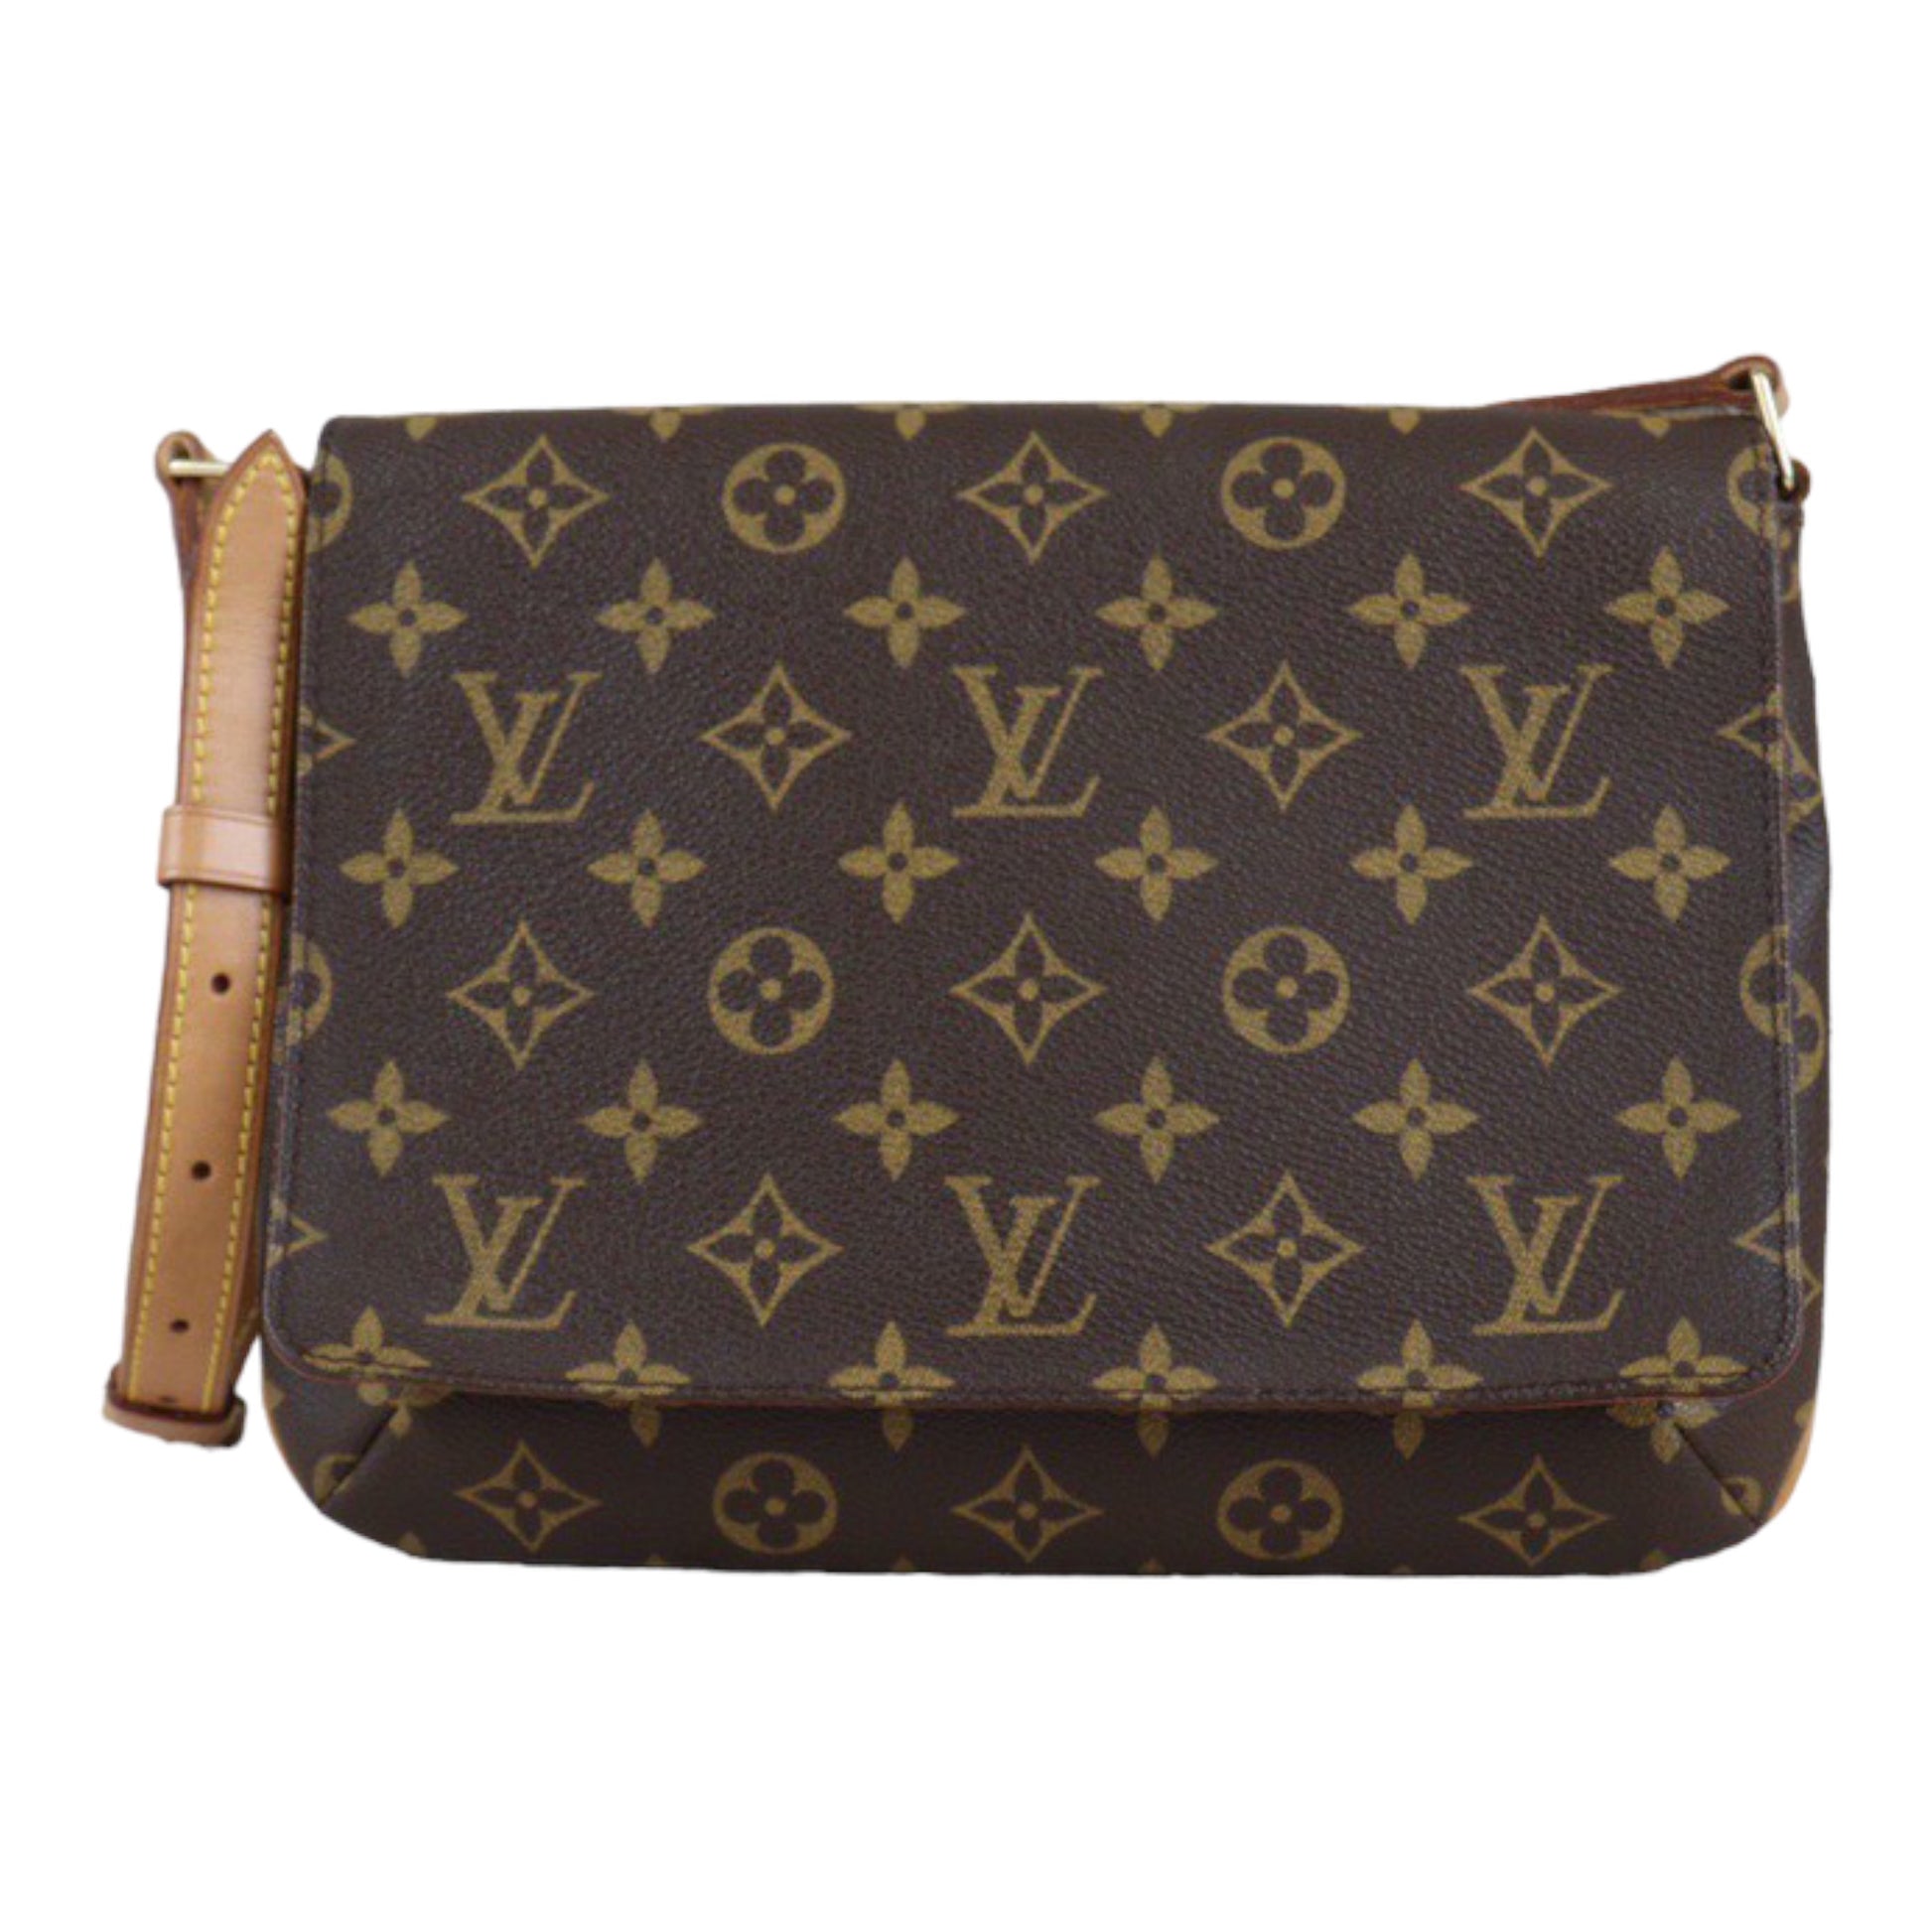 ✖️SOLD OUT✖️ LOUIS VUITTON Monogram Musette Tango In beautiful